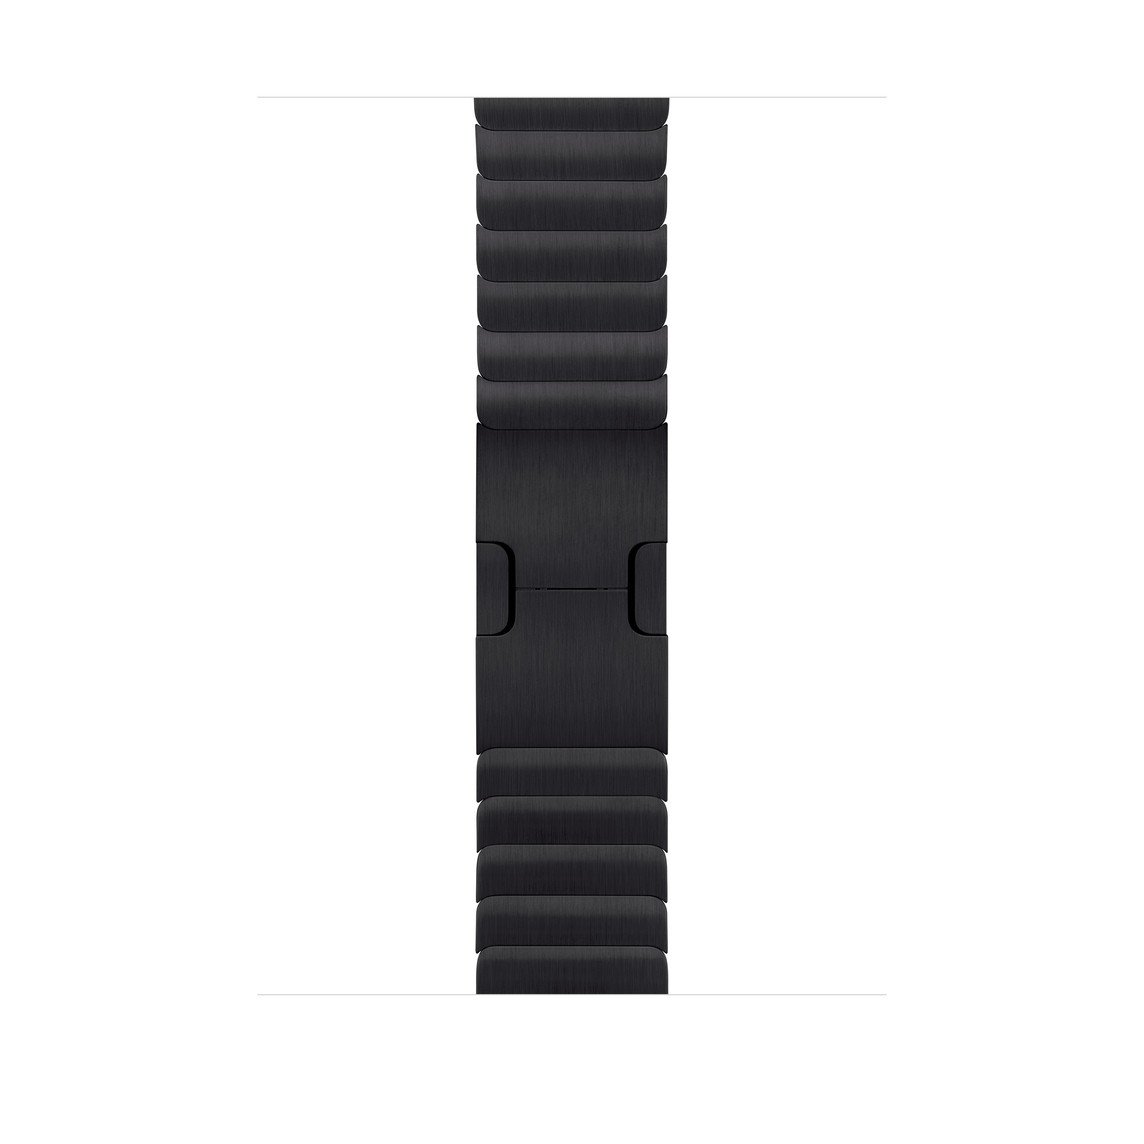 42mm Space Black Link Bracelet includes a simple release button, so you can add and remove links without any special tools.